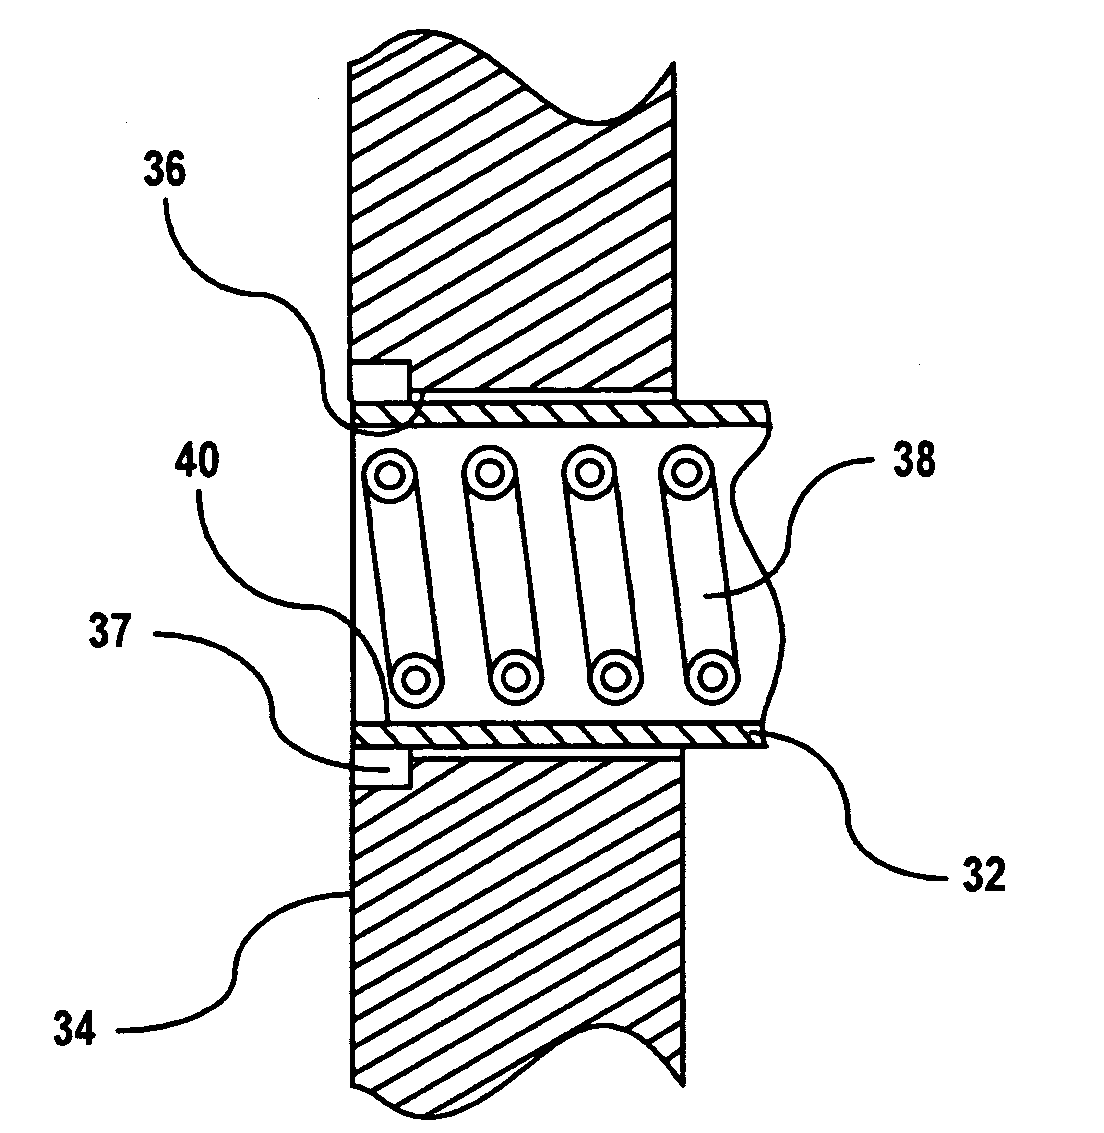 Vehicle exhaust component assembly using magnetic pulse welding